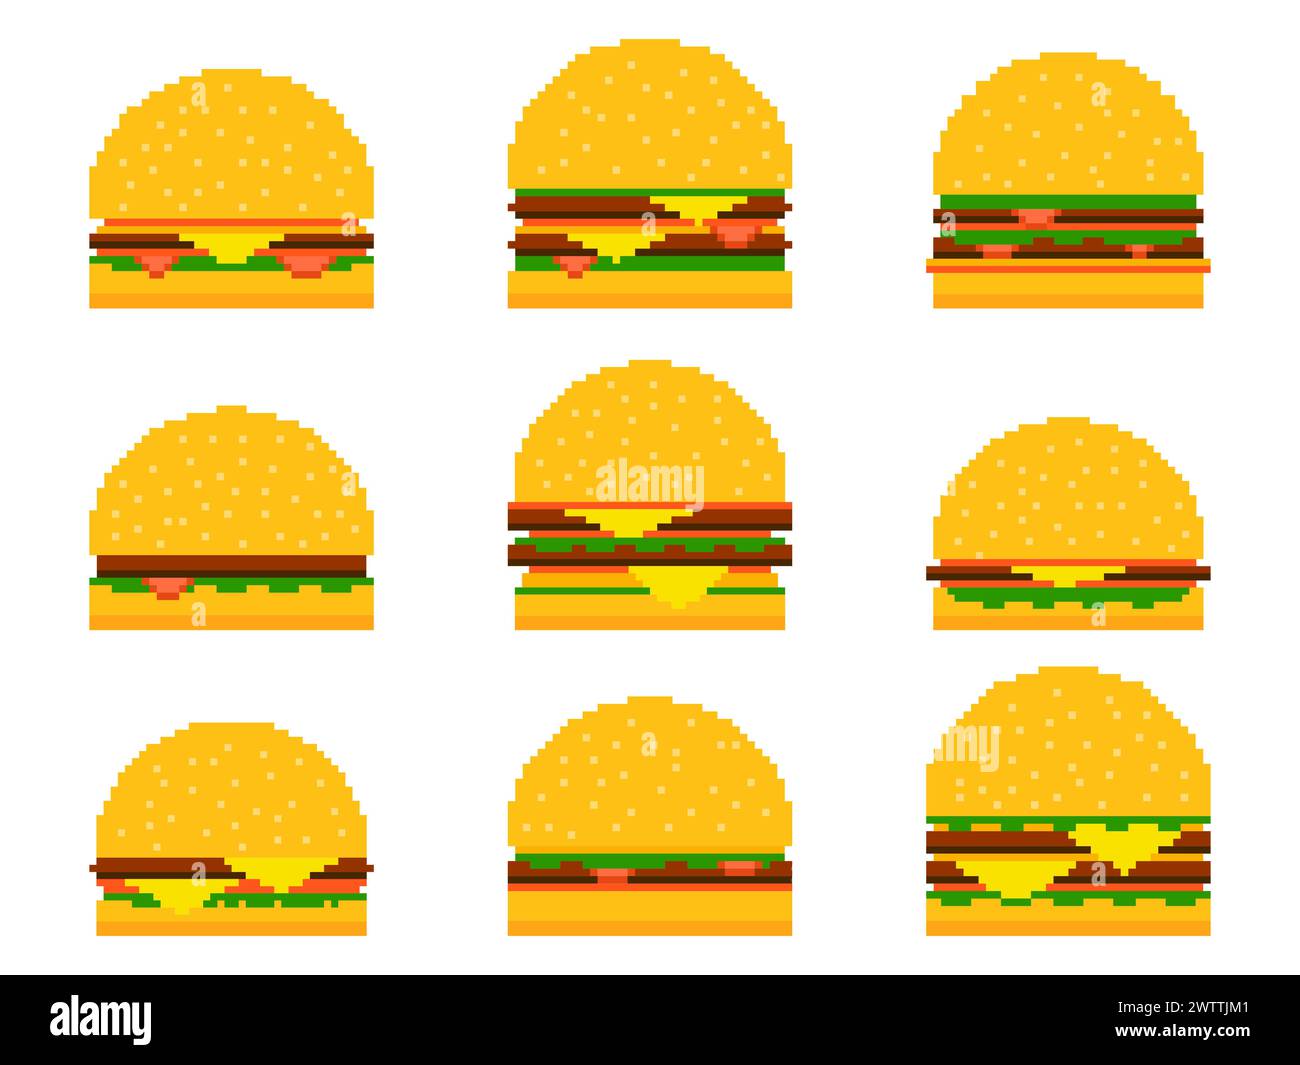 Pixel burger icon set isolated on white background. 8-bit cheeseburger with two cutlets and cheese. Collection of cheeseburger and hamburger icons in Stock Vector